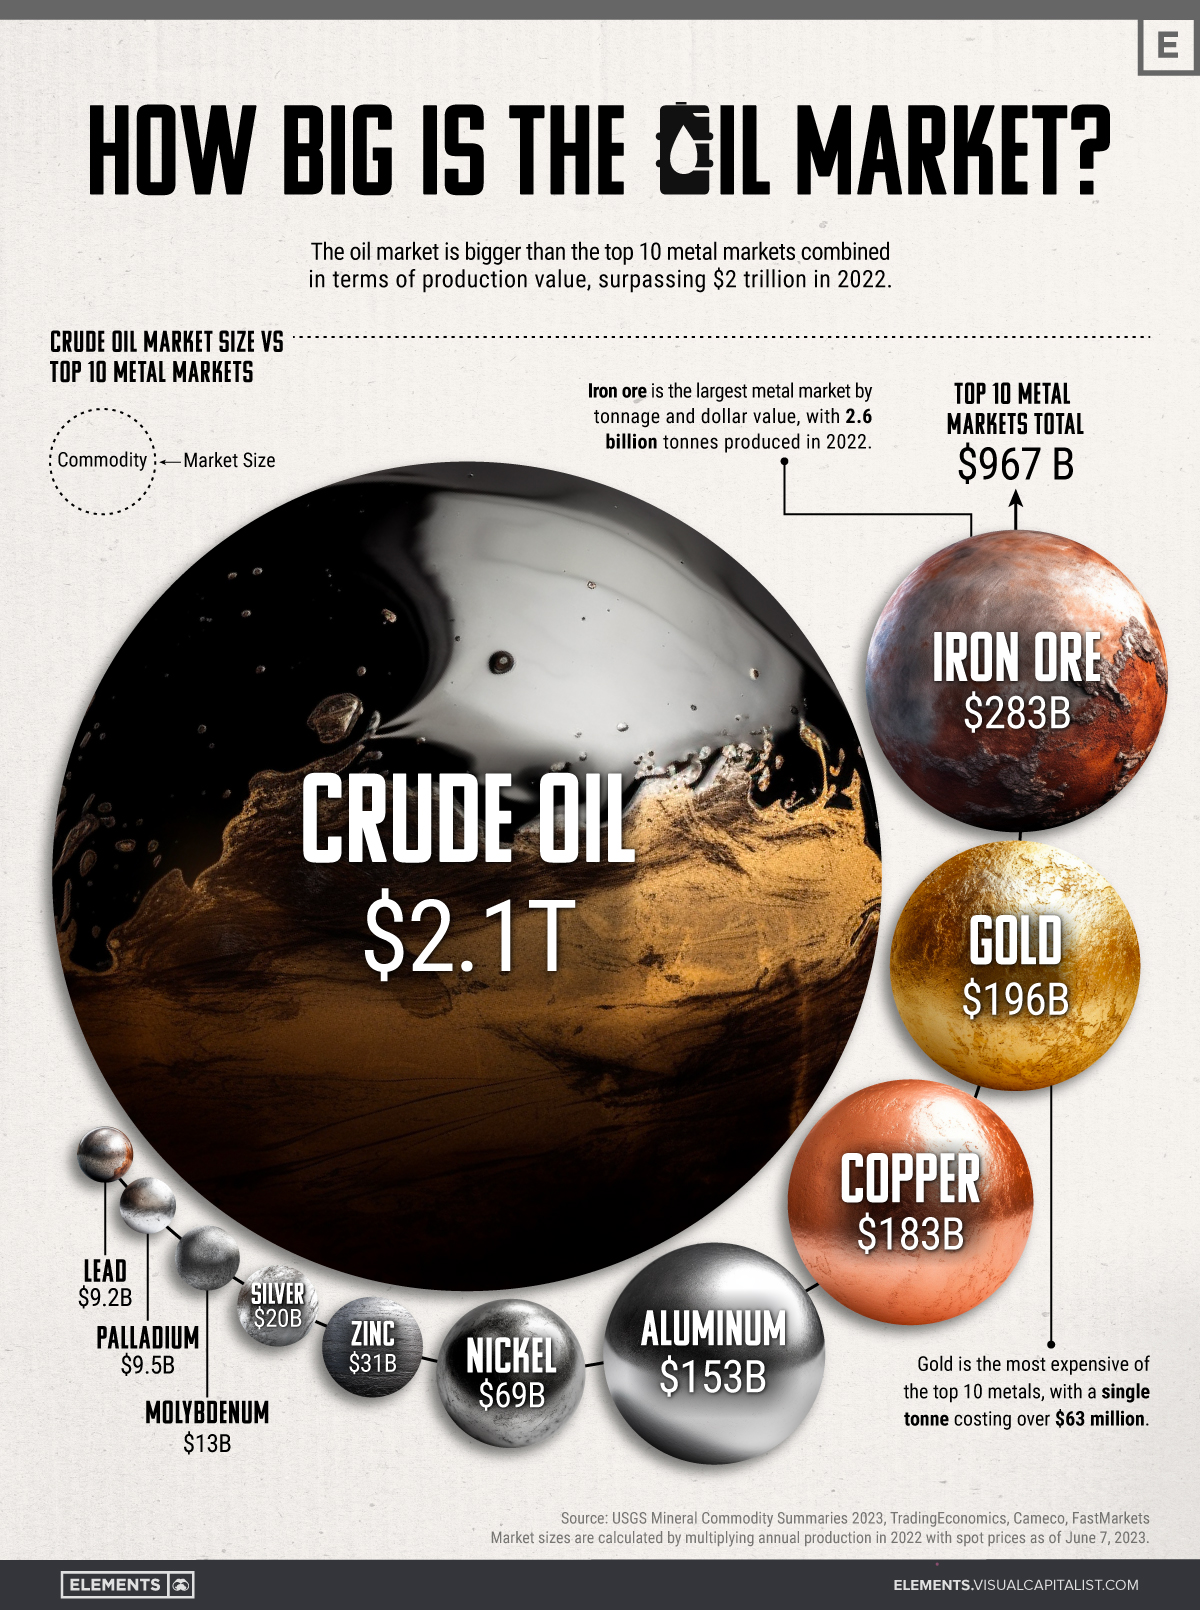 crude oil's market size compared to the top 10 metal markets